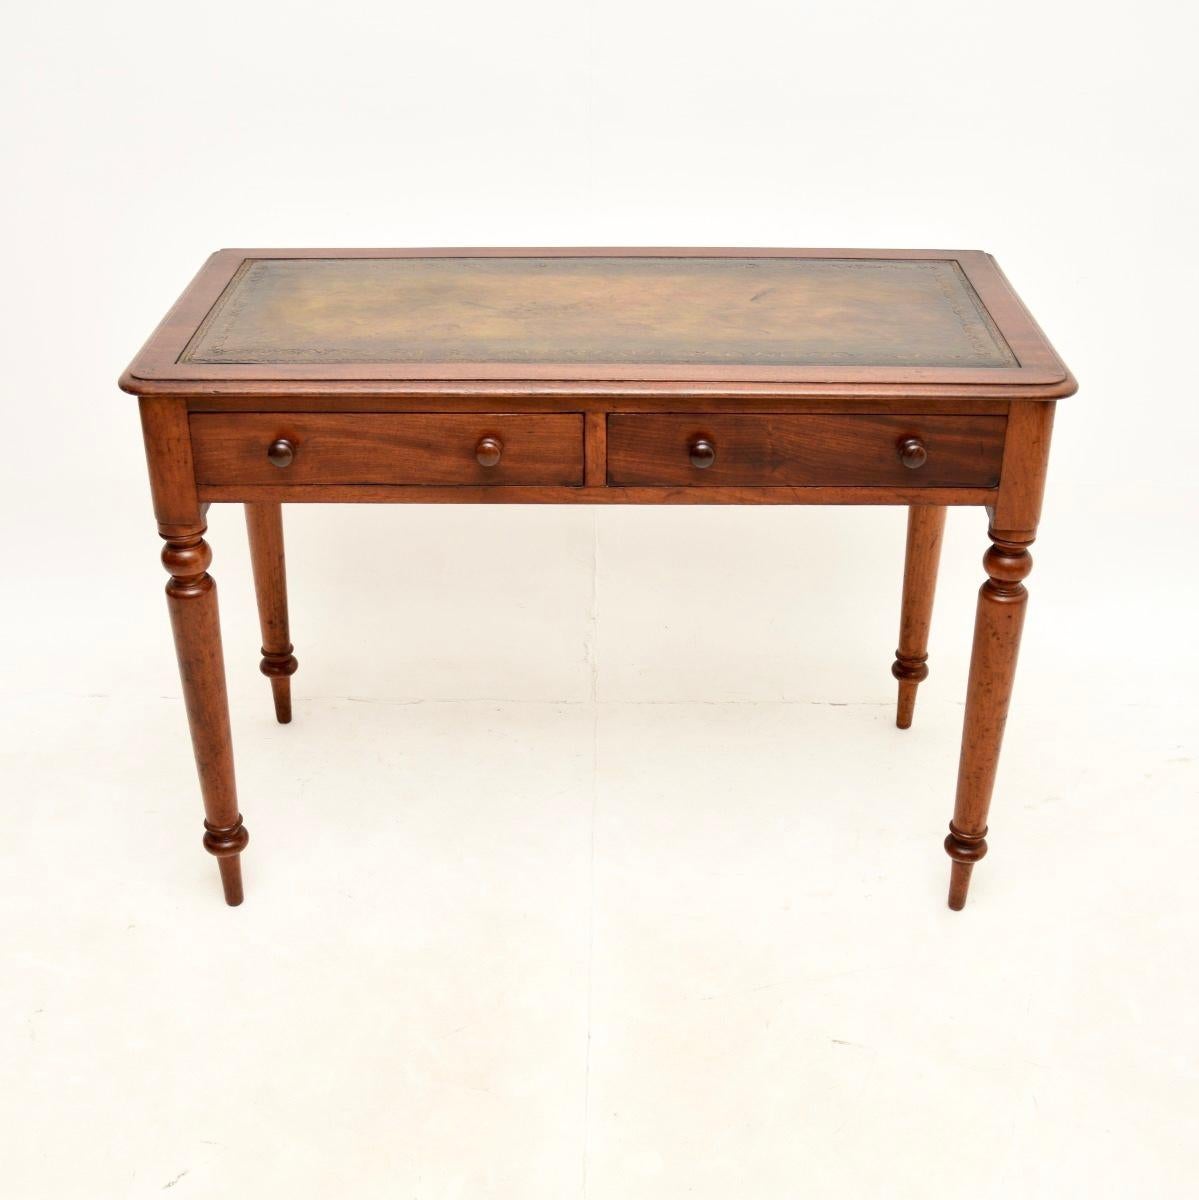 A smart and very useful antique Victorian writing table / desk. This was made in England, it dates from around the 1860-1880 period.

It is very well made and is a very useful size, not too deep from front to back. The inset leather writing surface